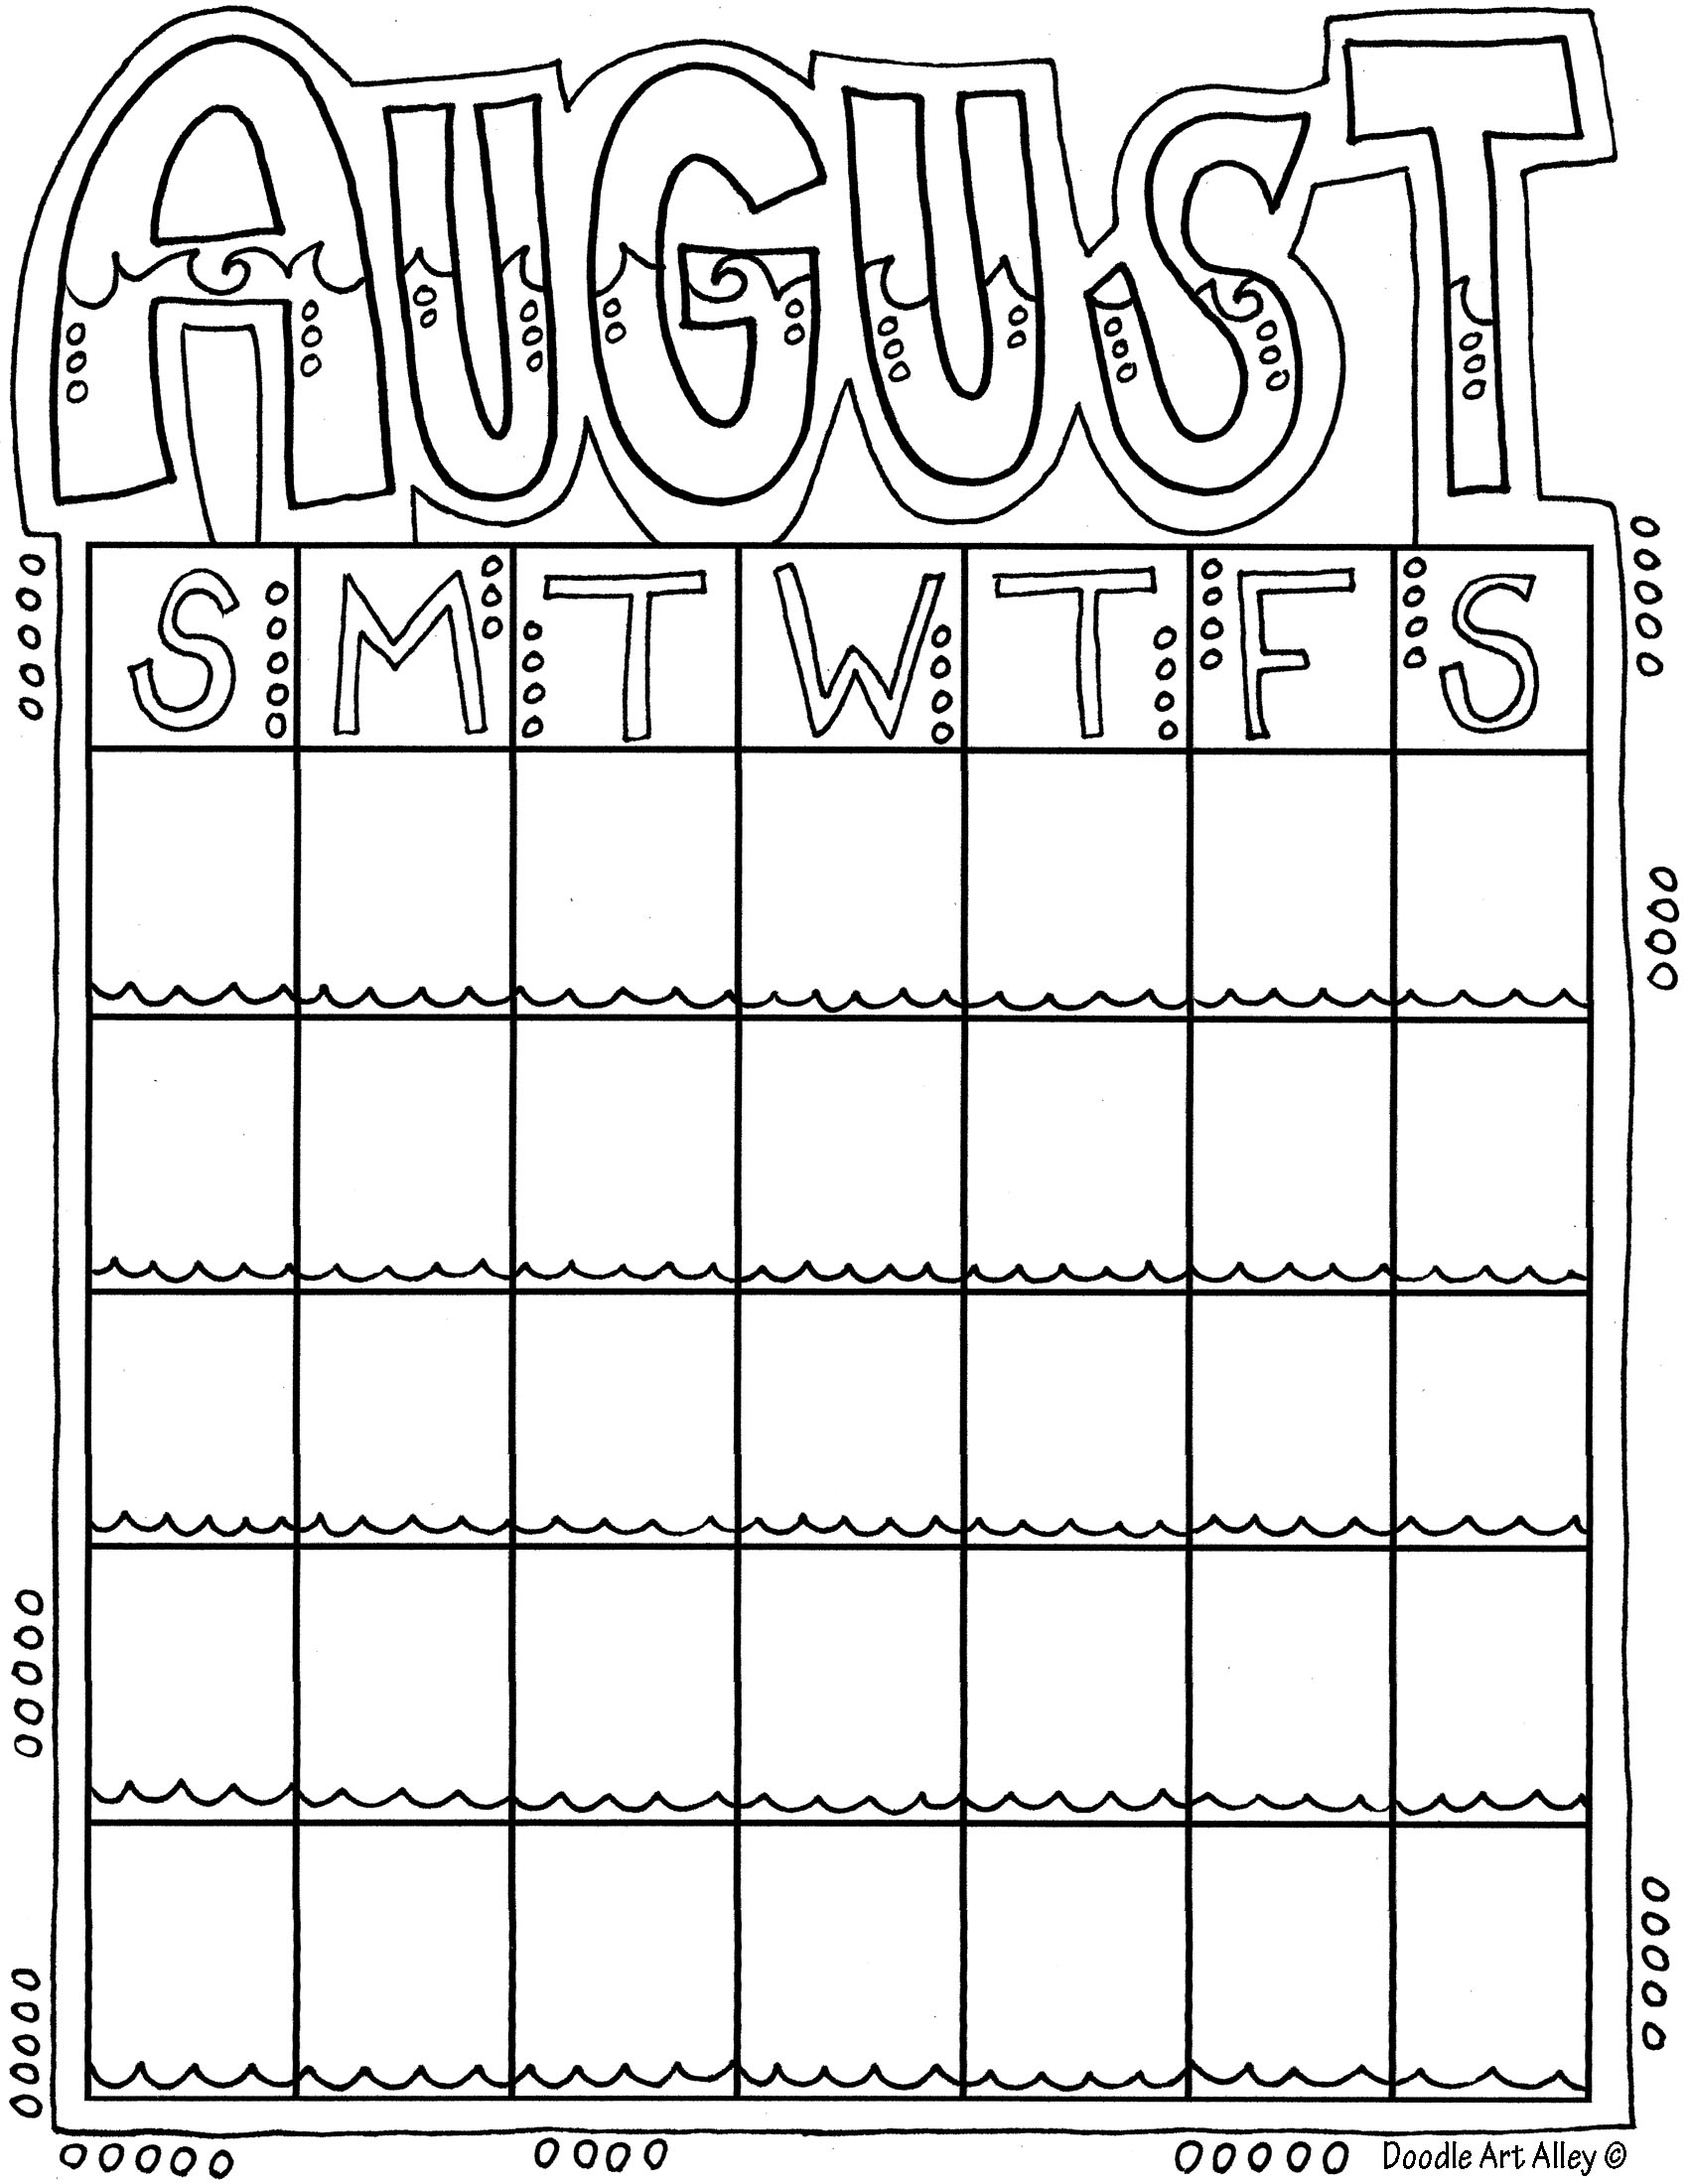 August Coloring Pages DOODLE ART ALLEY